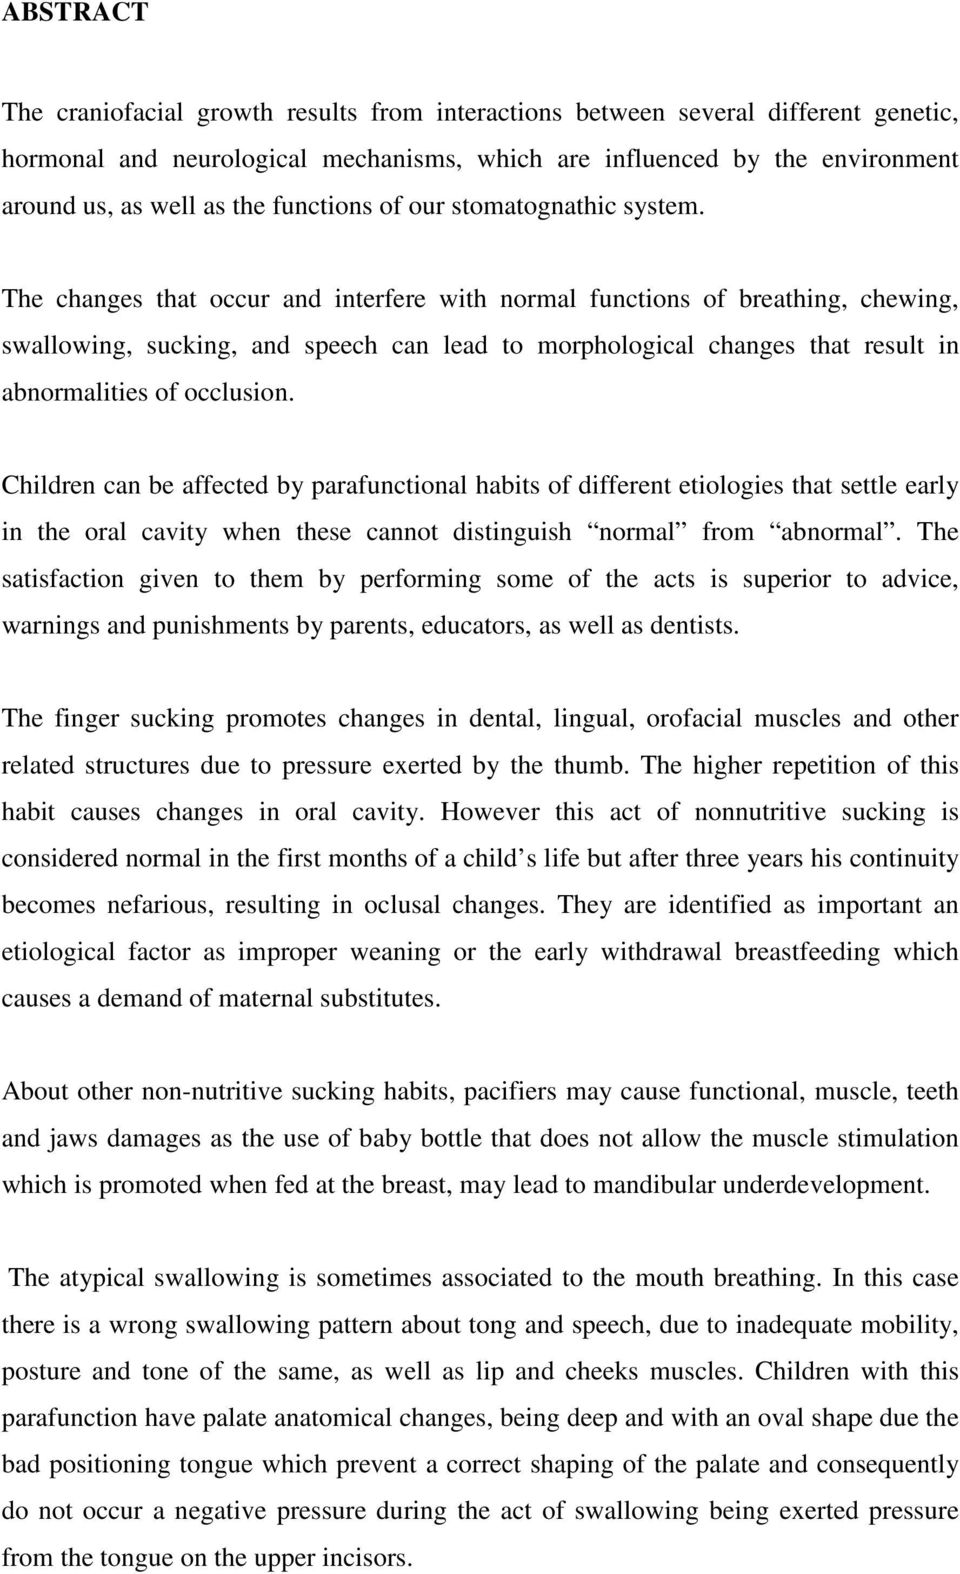 The changes that occur and interfere with normal functions of breathing, chewing, swallowing, sucking, and speech can lead to morphological changes that result in abnormalities of occlusion.